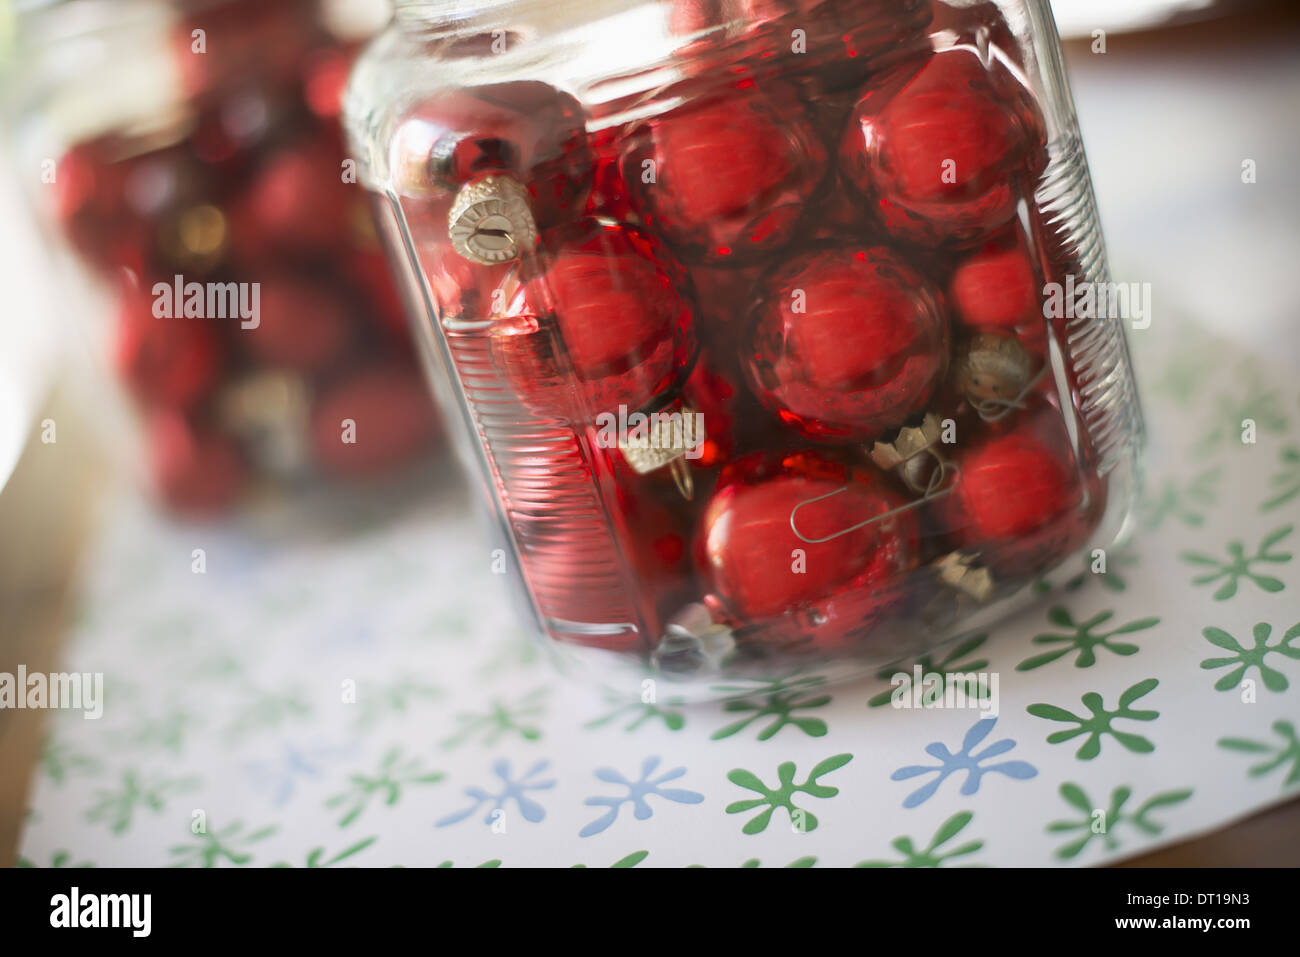 Woodstock New York USA Red glass ball Christmas ornaments in glass jars Stock Photo